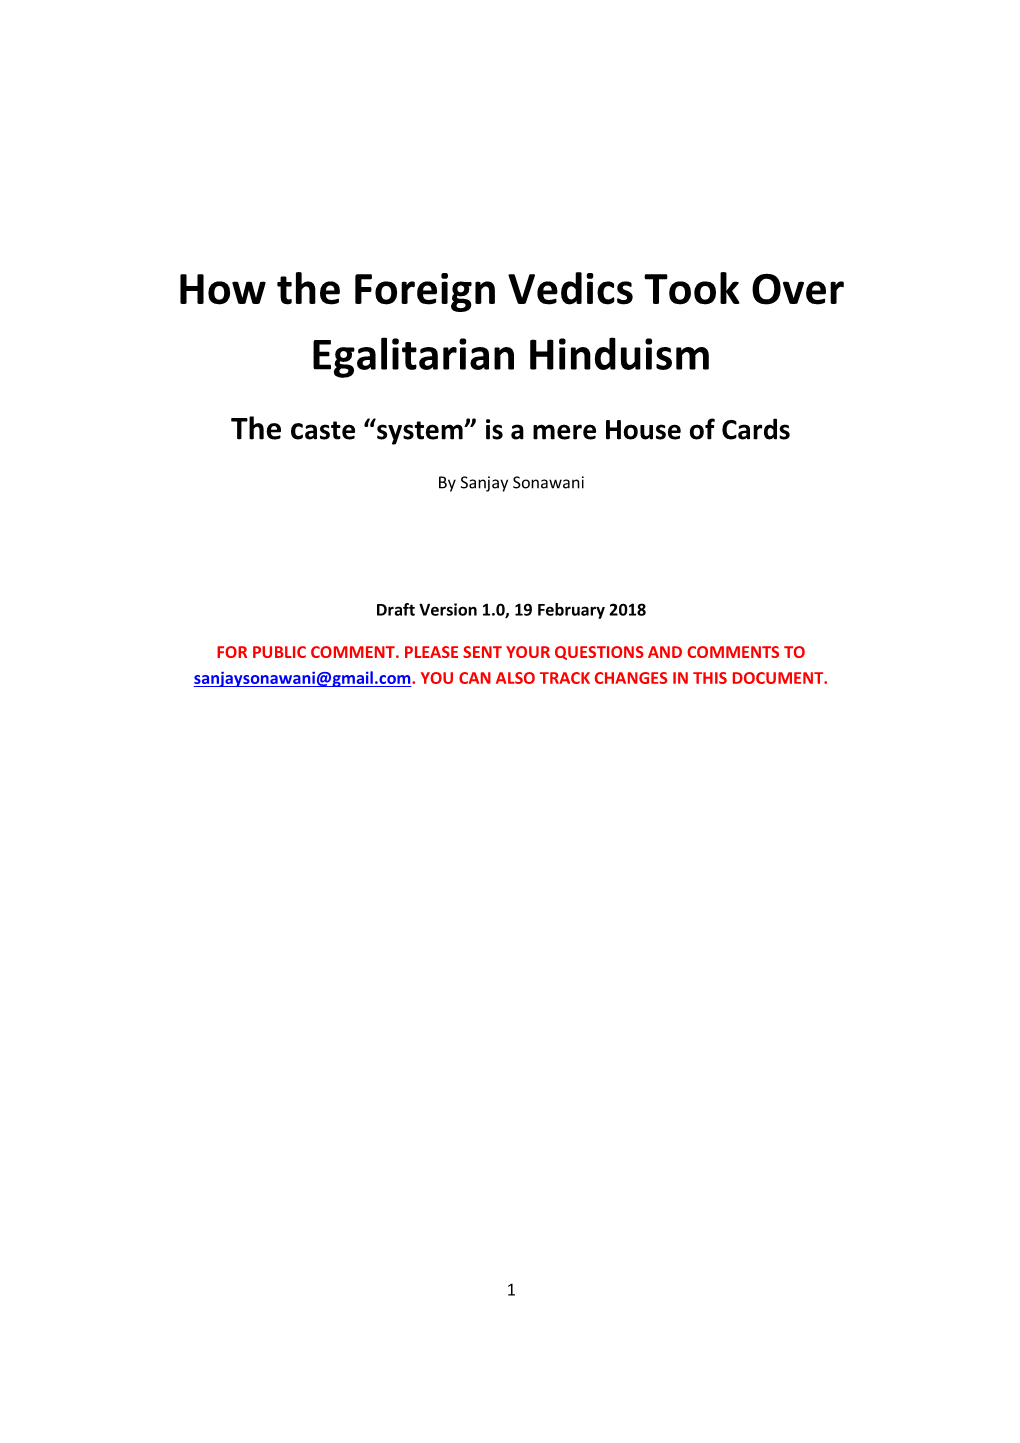 How the Foreign Vedics Took Over Egalitarian Hinduism